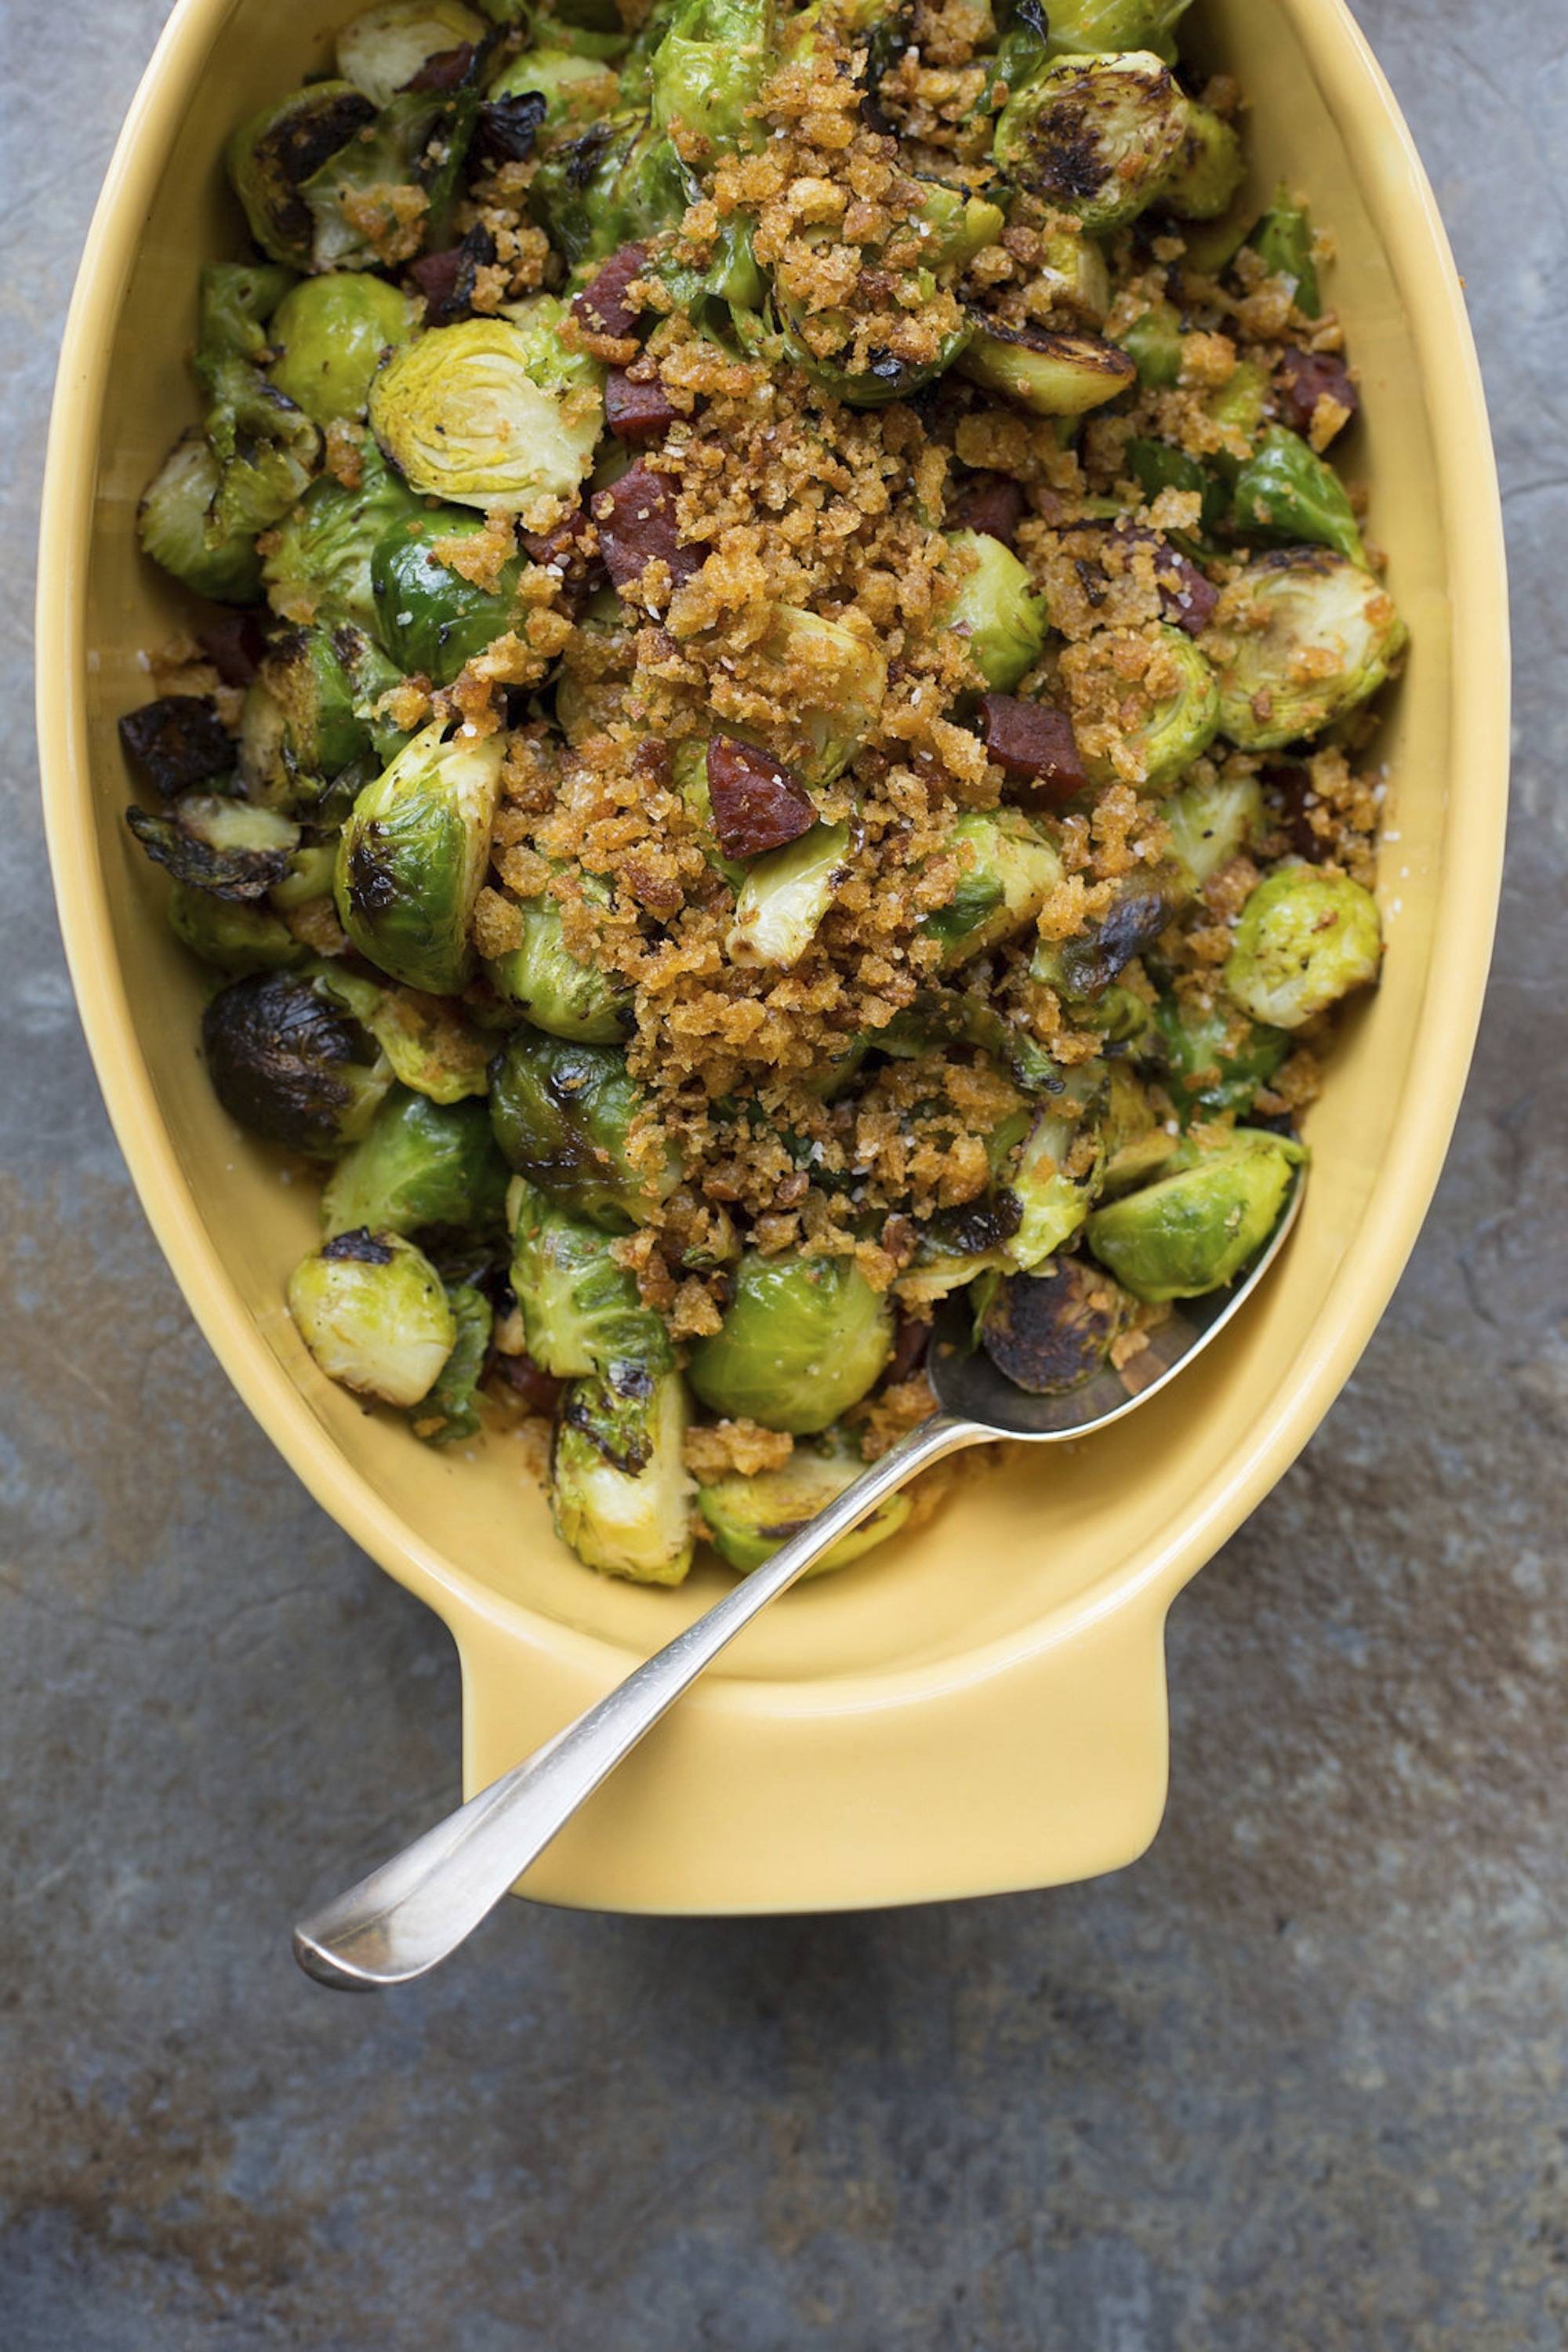 This Feb. 13 photo shows pan-roasted Brussels sprouts with chorizo and toasted bread crumbs. This dish is from a recipe by Katie Workman. (Sarah Crowder via AP)